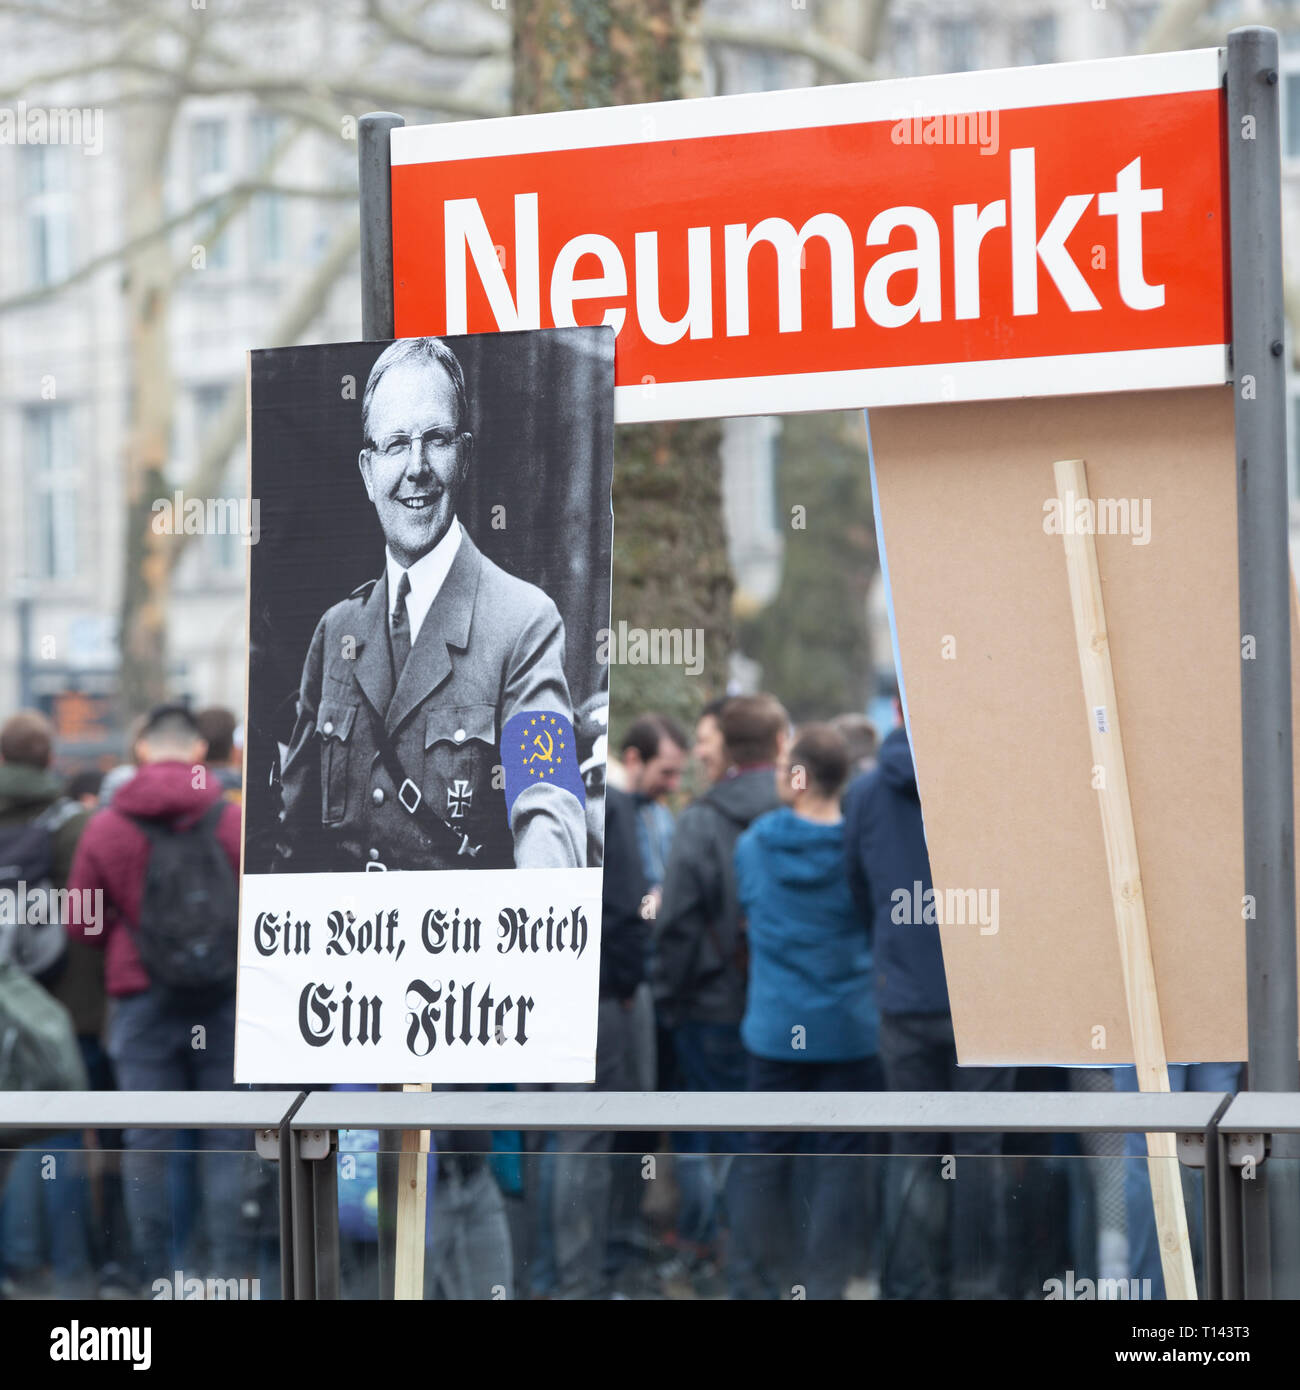 Cologne, Germany, March 23 2019: Demonstration against upload filter, on a poster standing apart is the politician Axel Voss shown.             Credit: Juergen Schwarz/Alamy Live News Stock Photo